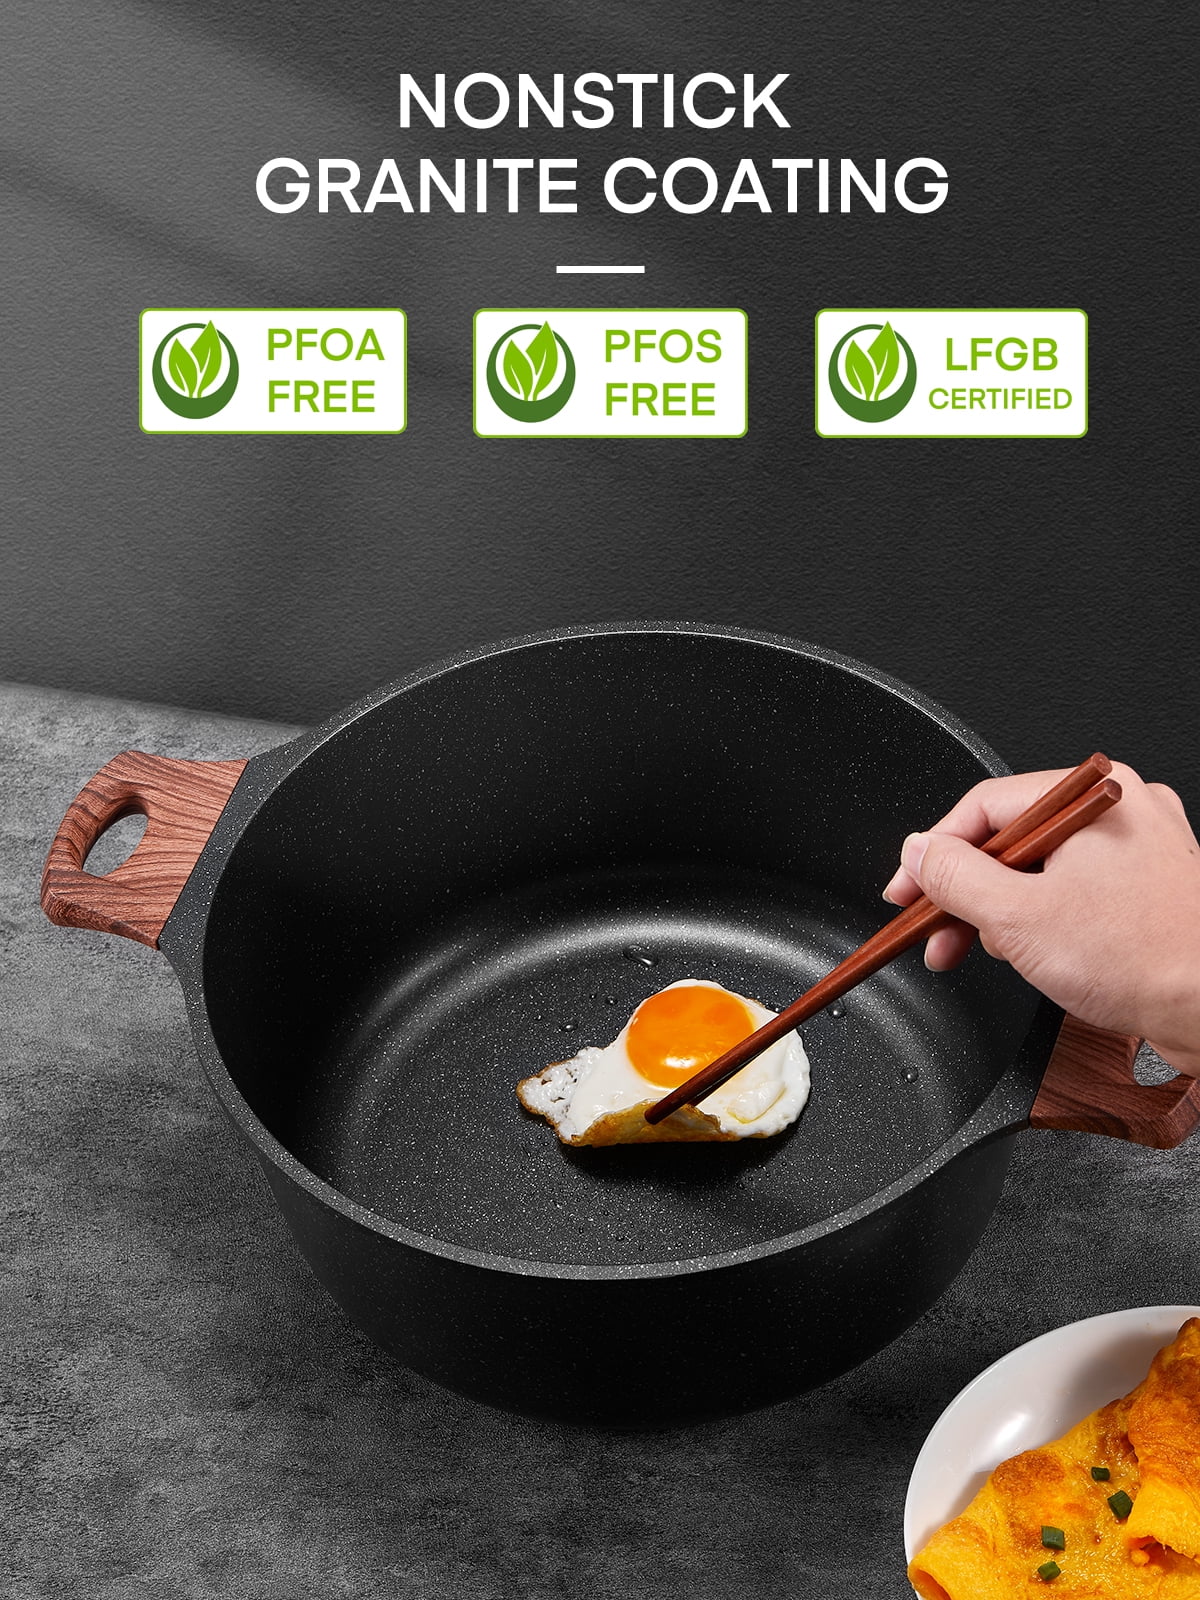 Pans For Cooking, Soup Pot, Five-ply Stainless Steel Saute Pan, Hot Pot 6  Quarts Deep Frying Pan, Induction Compatible Cooking Pan, Saute Pan With Lid,  Dishwasher & Oven Safe - Temu